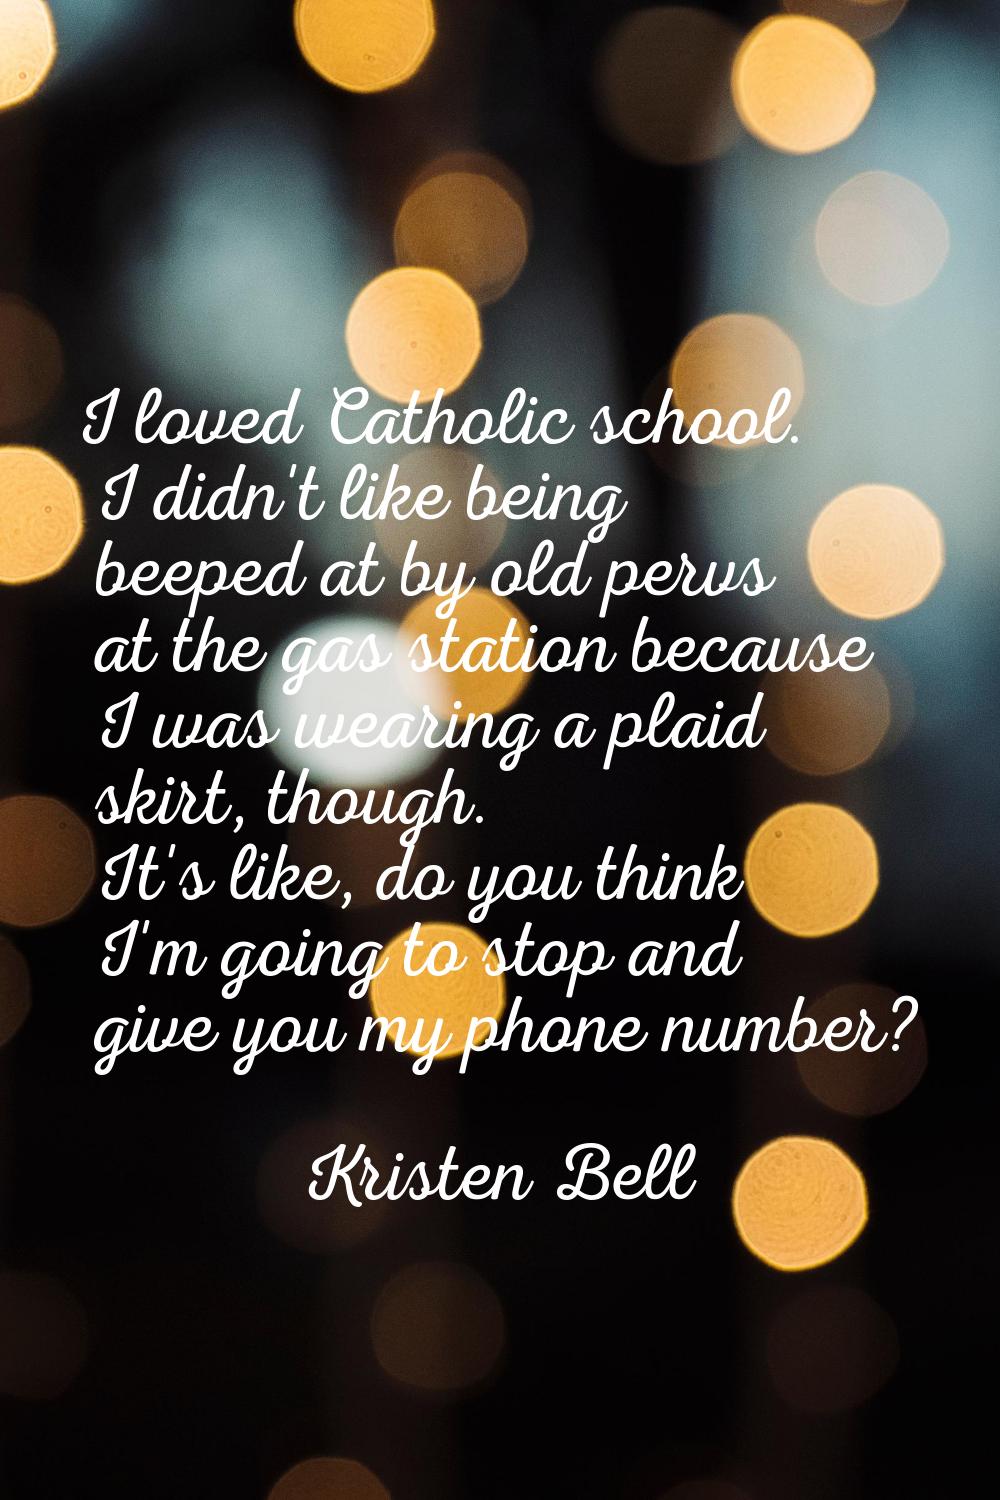 I loved Catholic school. I didn't like being beeped at by old pervs at the gas station because I wa